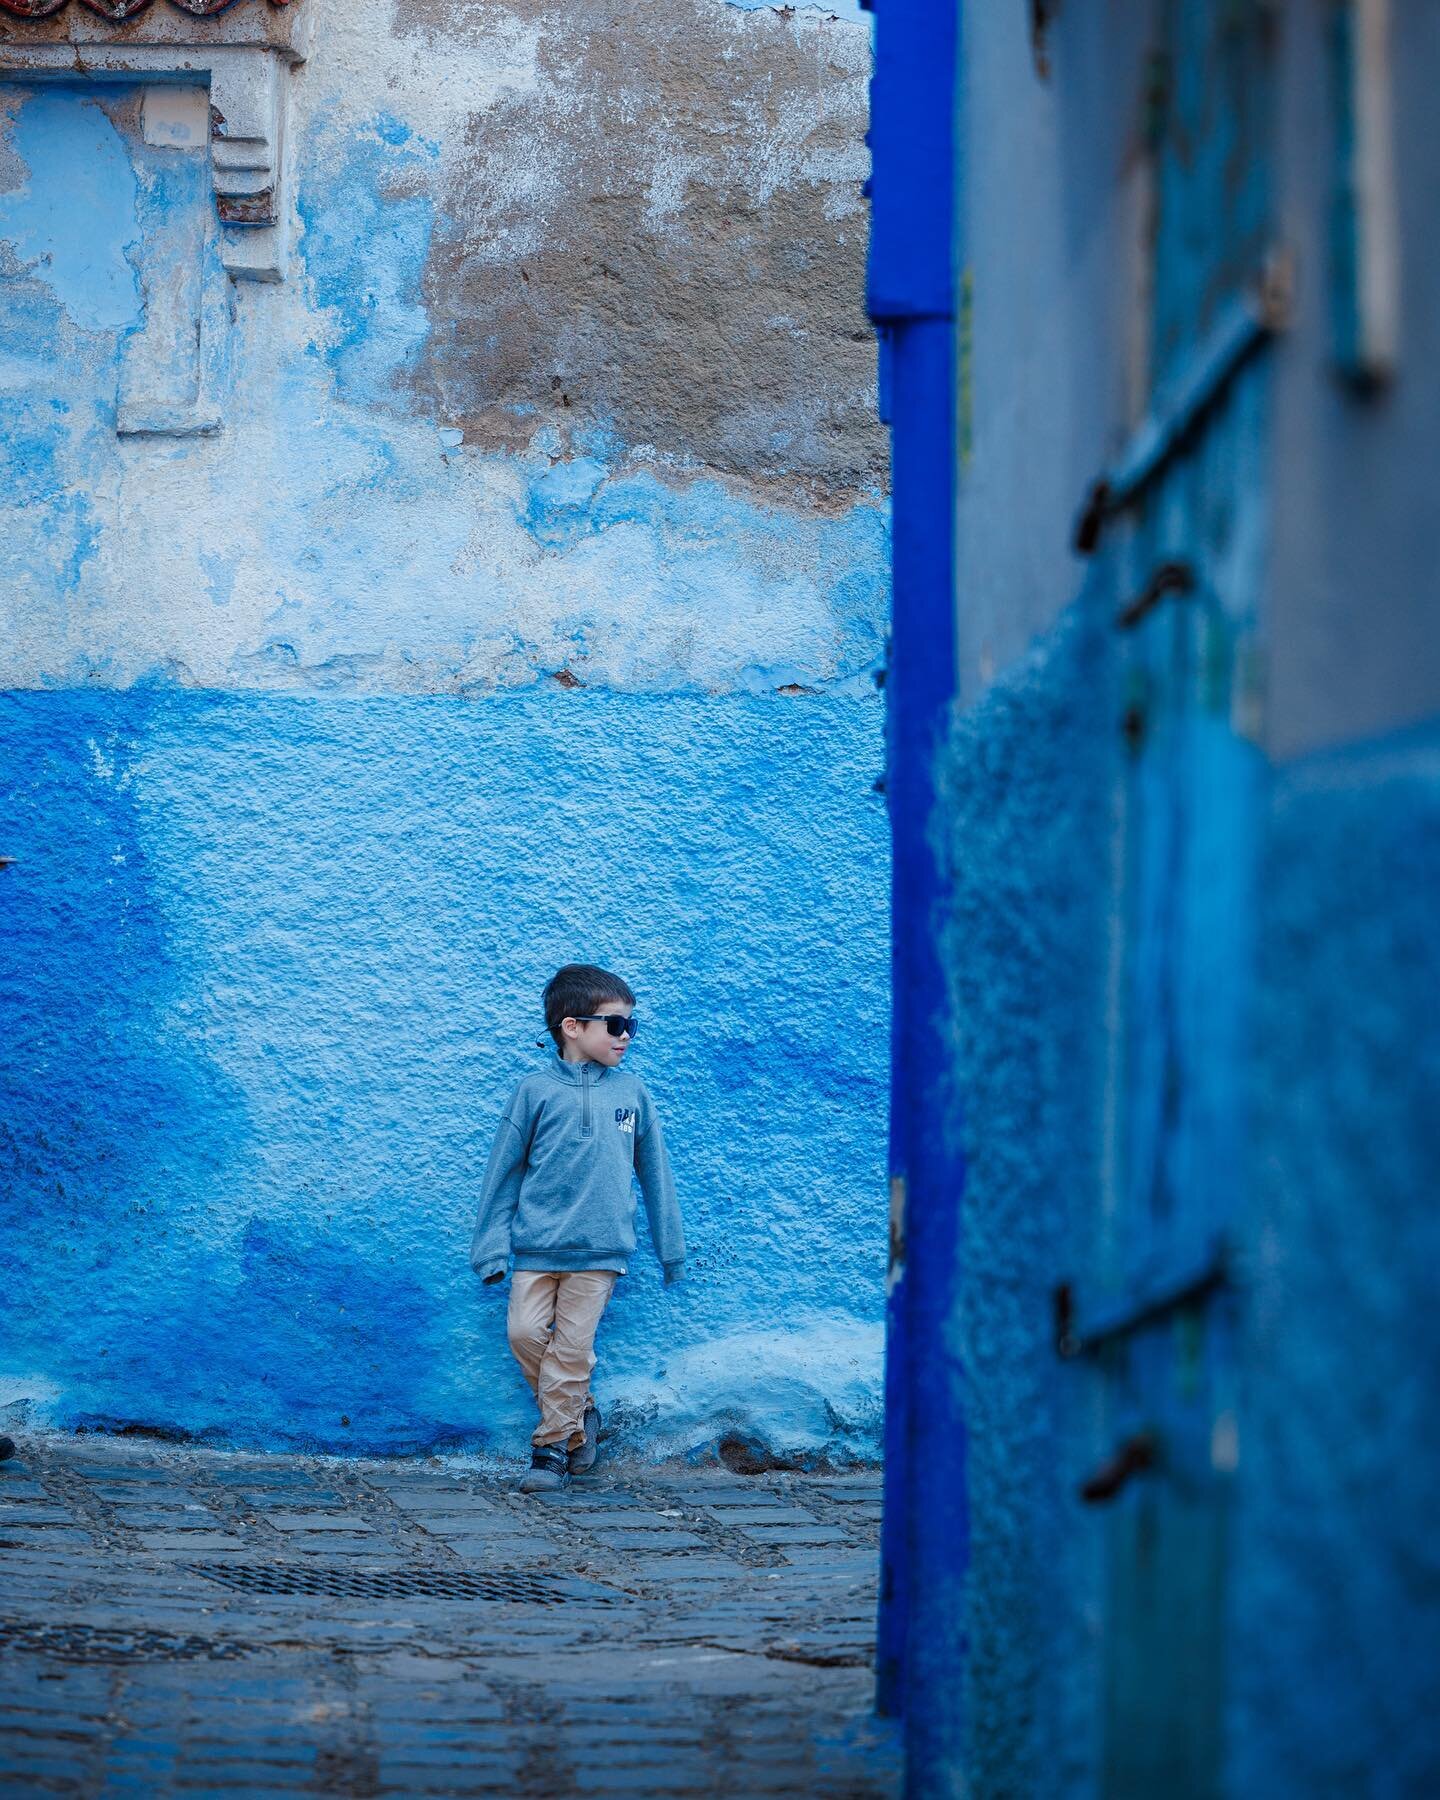 Family Trip Week 20.  Chefchaouen, Morocco.  The Blue City.  After my last post, we&rsquo;ve already entered Italy twice (week 17 &amp; 19) and had an amazing 2.5-week road trip in Romania (week 17-19). So again, backlogged but can&rsquo;t resist sha